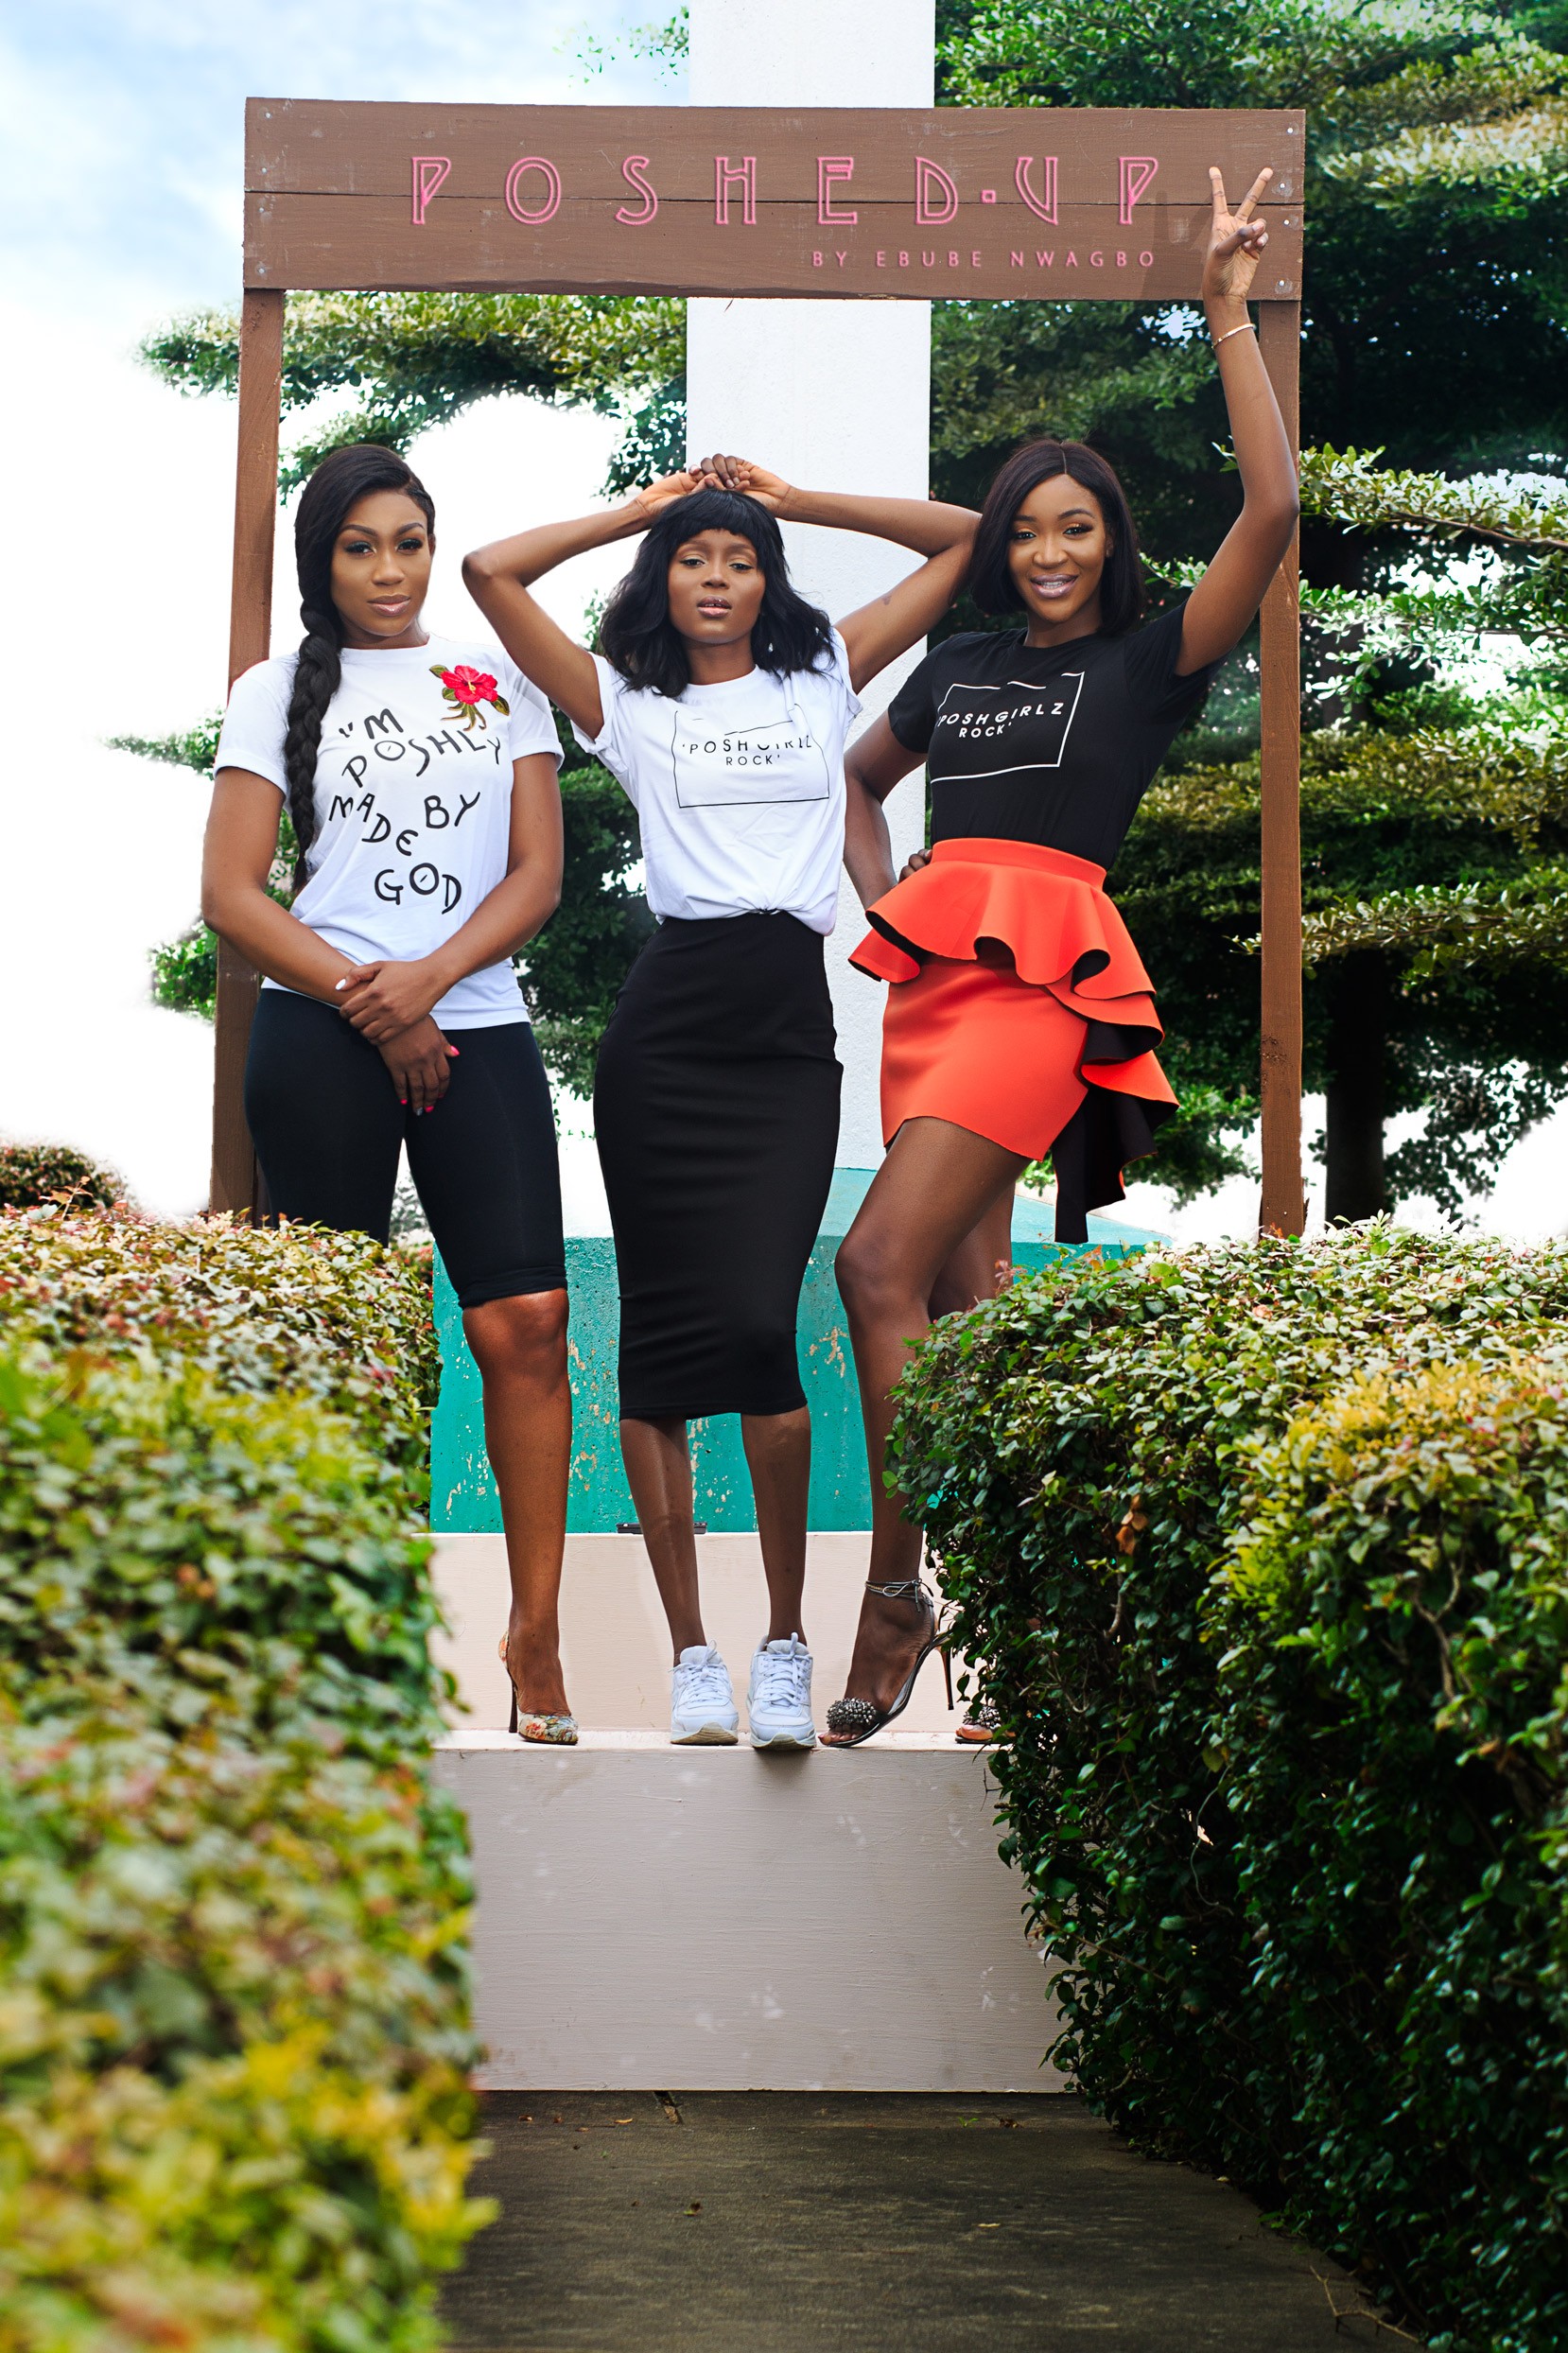 Nollywood actress,Ebube Nwagbo launches her new clothing line 